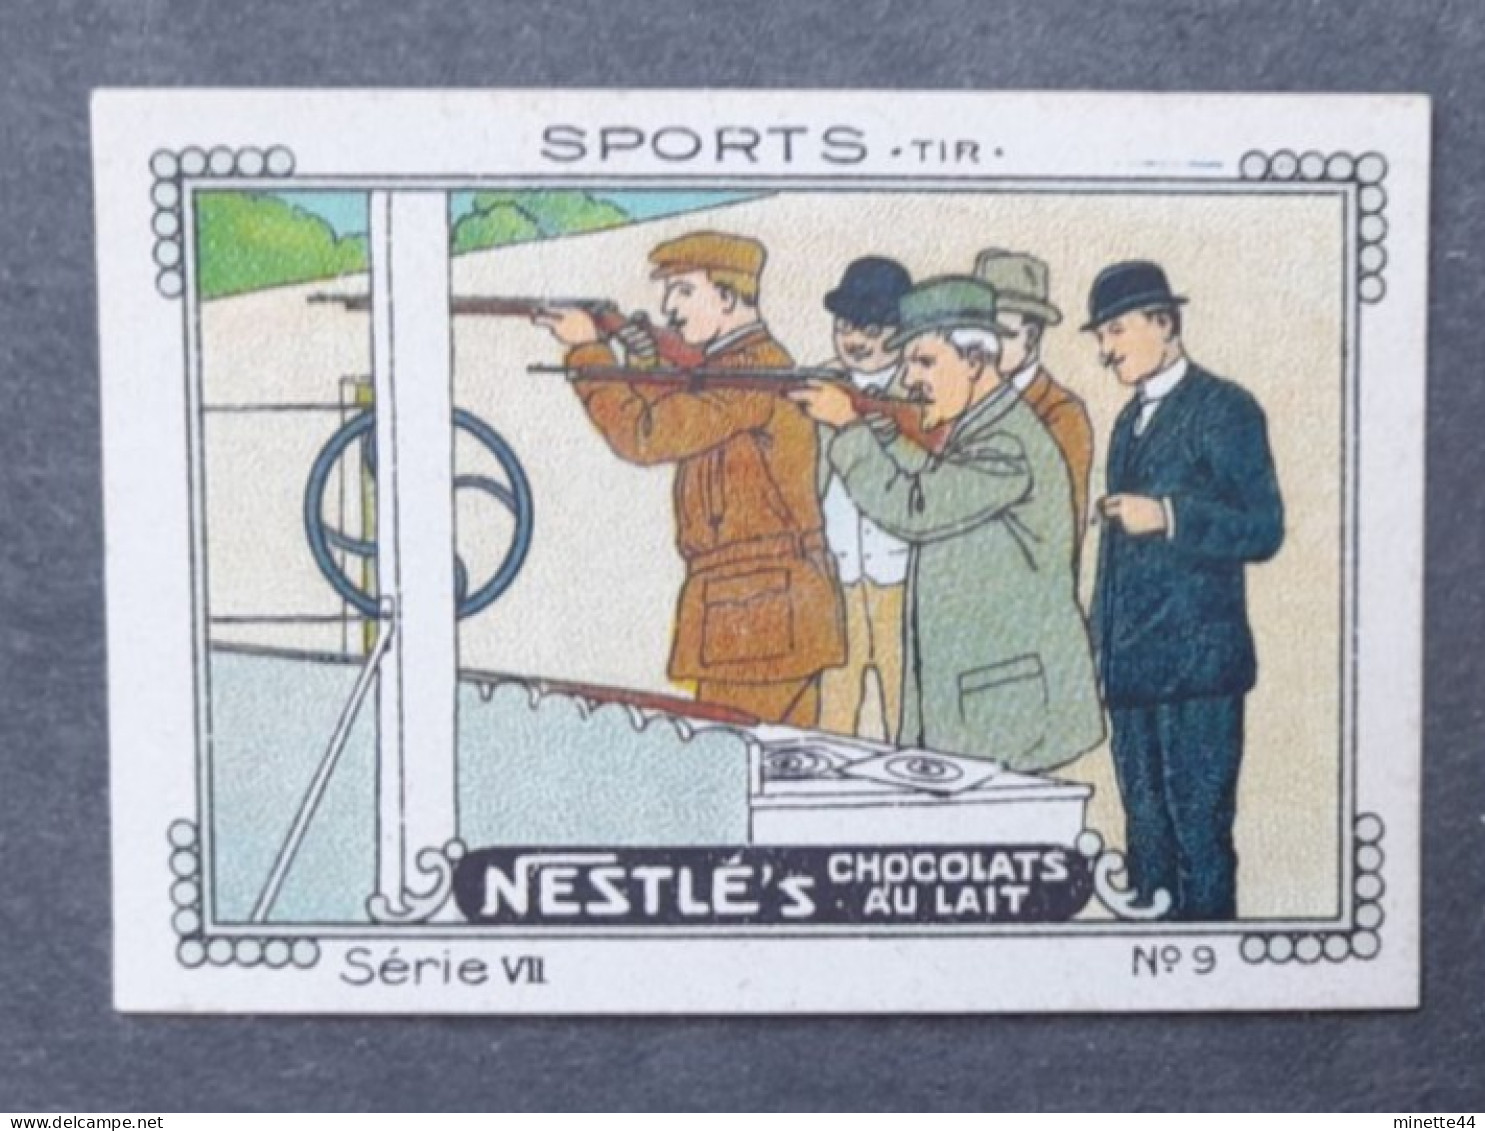 SUISSE NESTLE  1900'  TIR SHOT JEUX GAMES Imperf Nd - Shooting (Weapons)